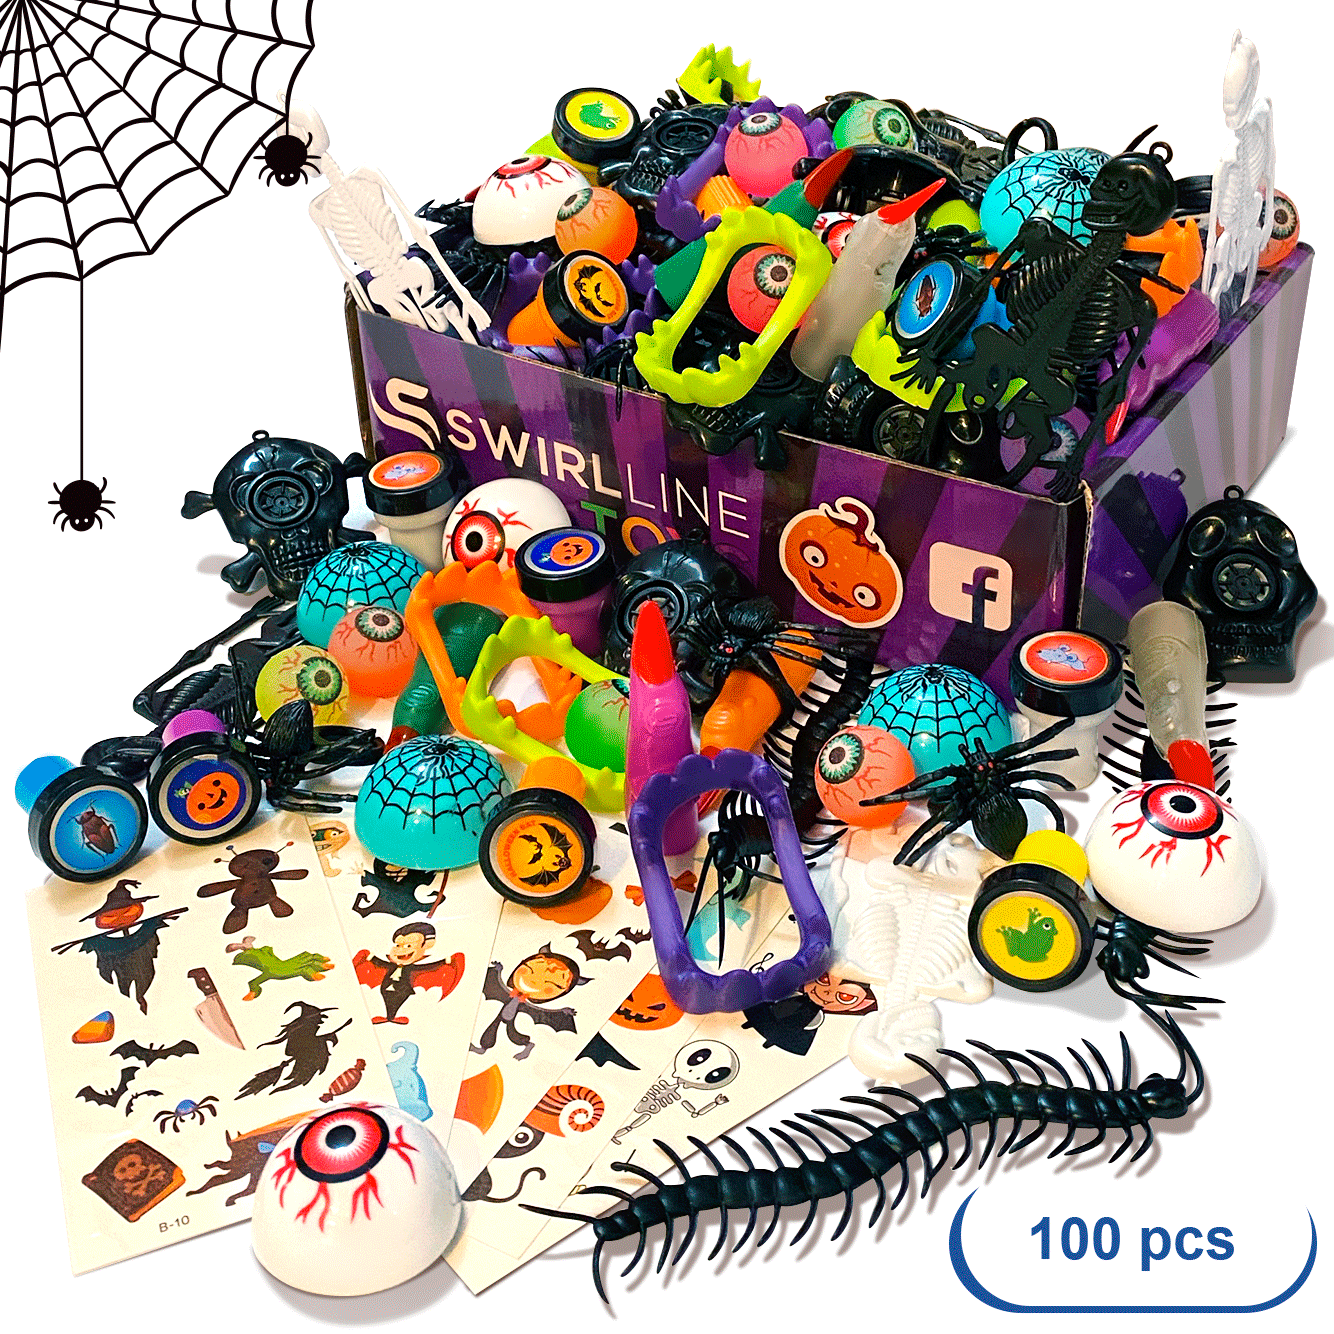  WOONOO 200PCS Halloween Party Favors for Kids Stationery Set,  30 PACK Assorted Halloween Goodie Bag Fillers, Bulk Halloween Treats Bags  for Trick or Treat Pencils Erasers Rulers : Toys & Games